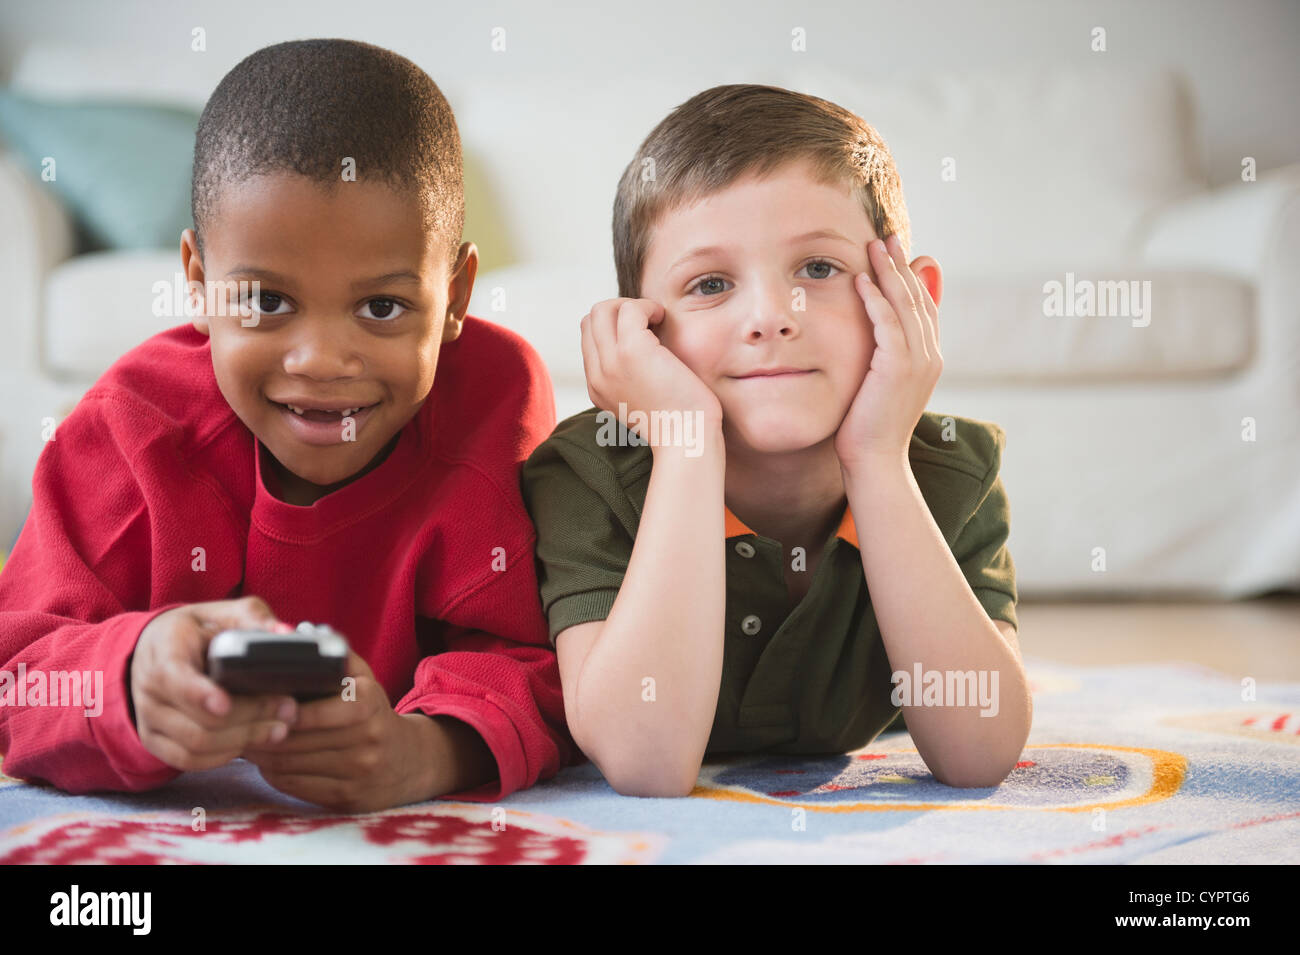 Boys watching television together Stock Photo